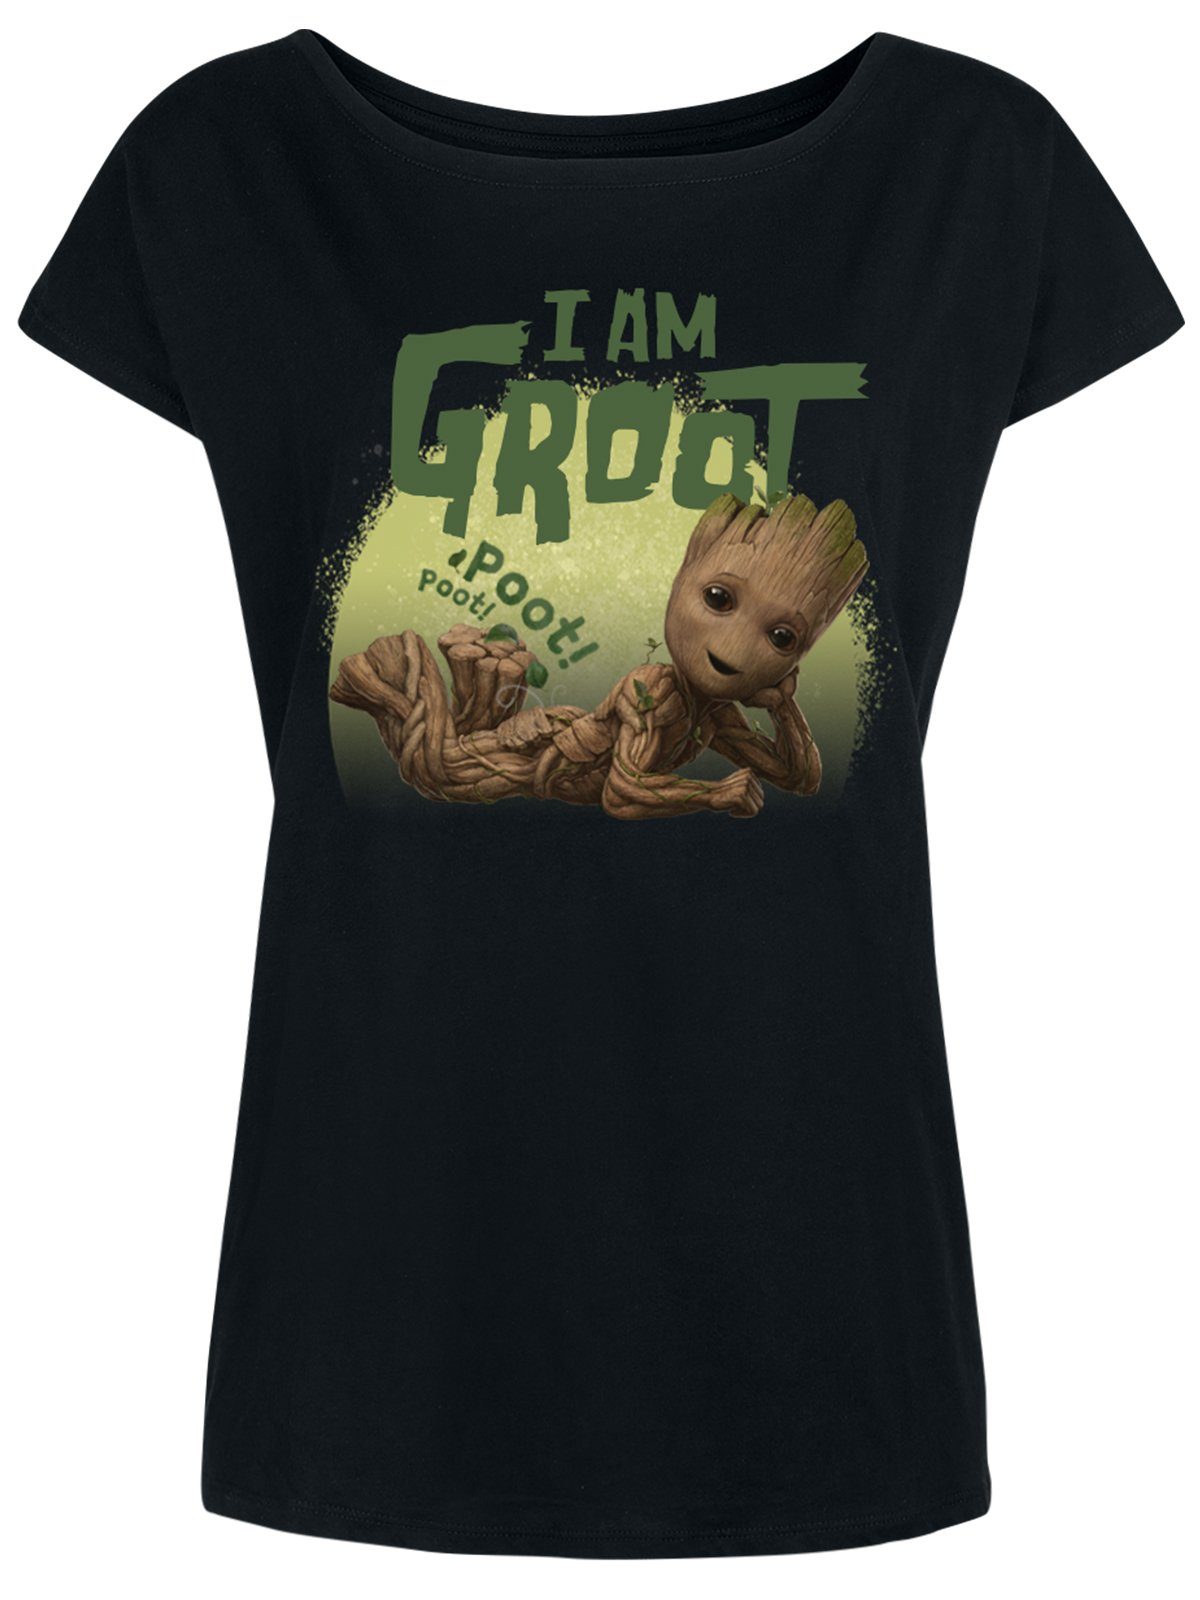 T-Shirt Poot! Galaxy Guardians the of MARVEL Poot!